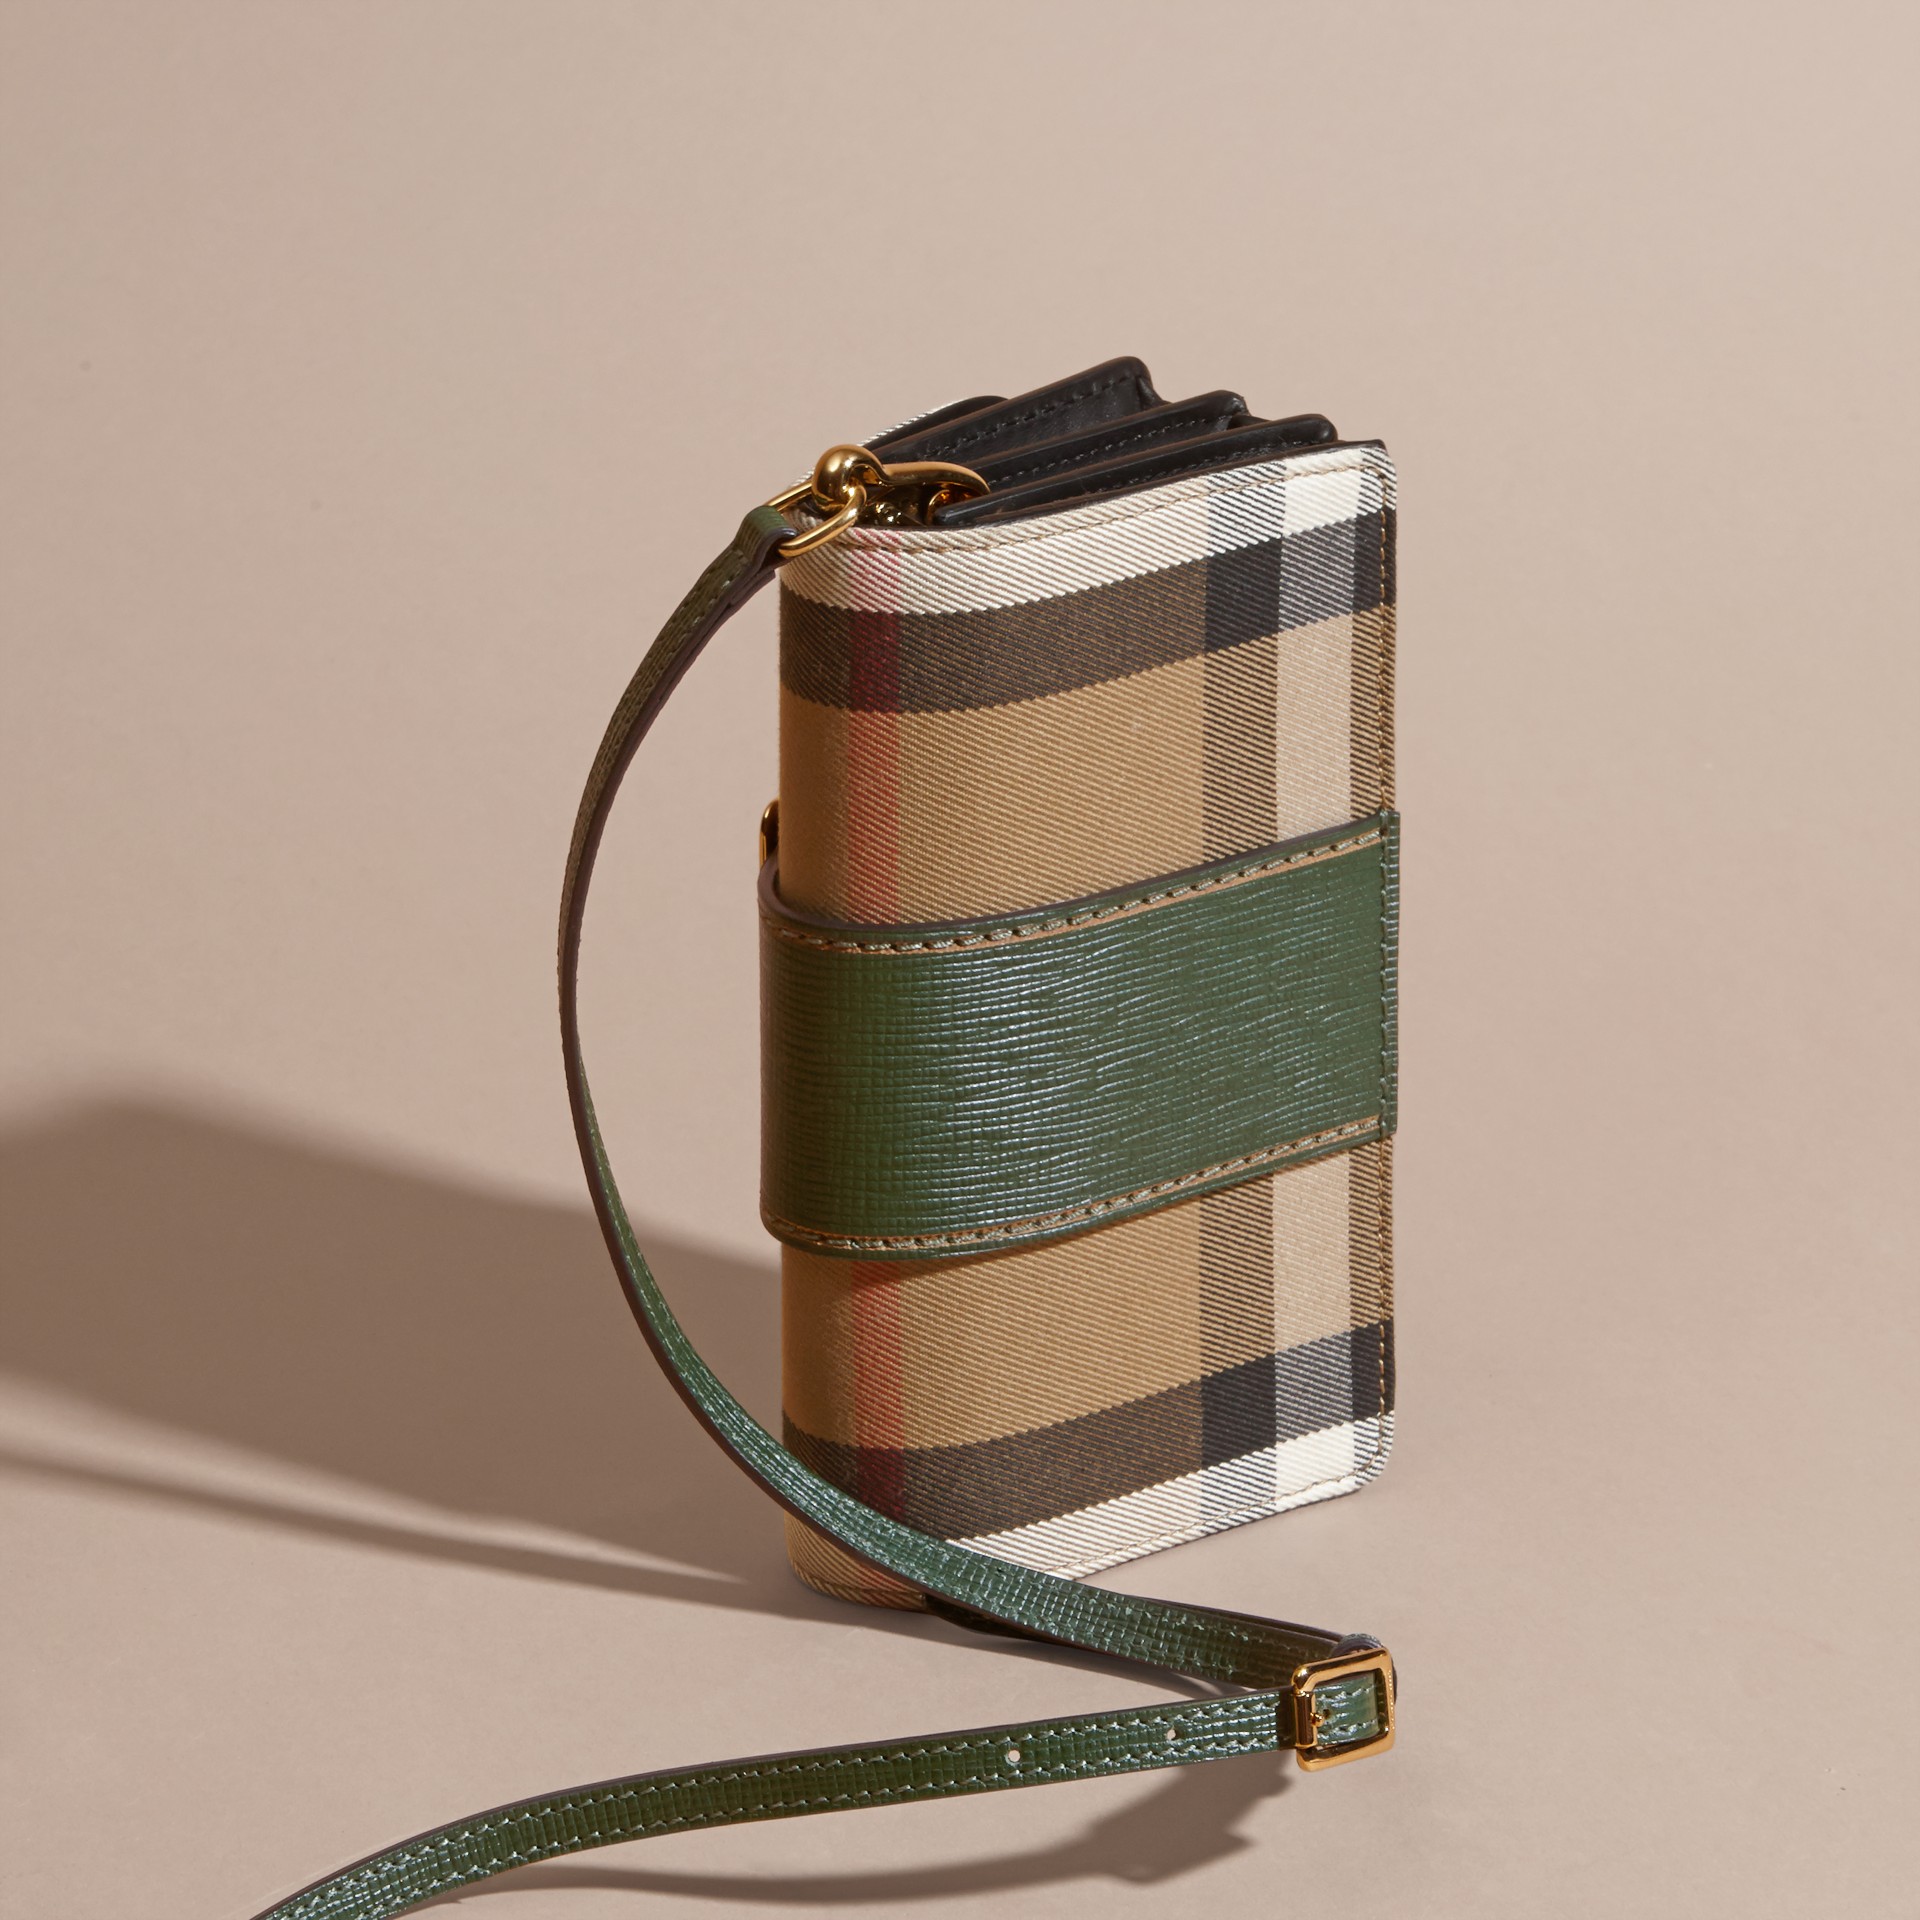 The Small Buckle Bag in House Check and Leather in Kelly Green/kelly ...